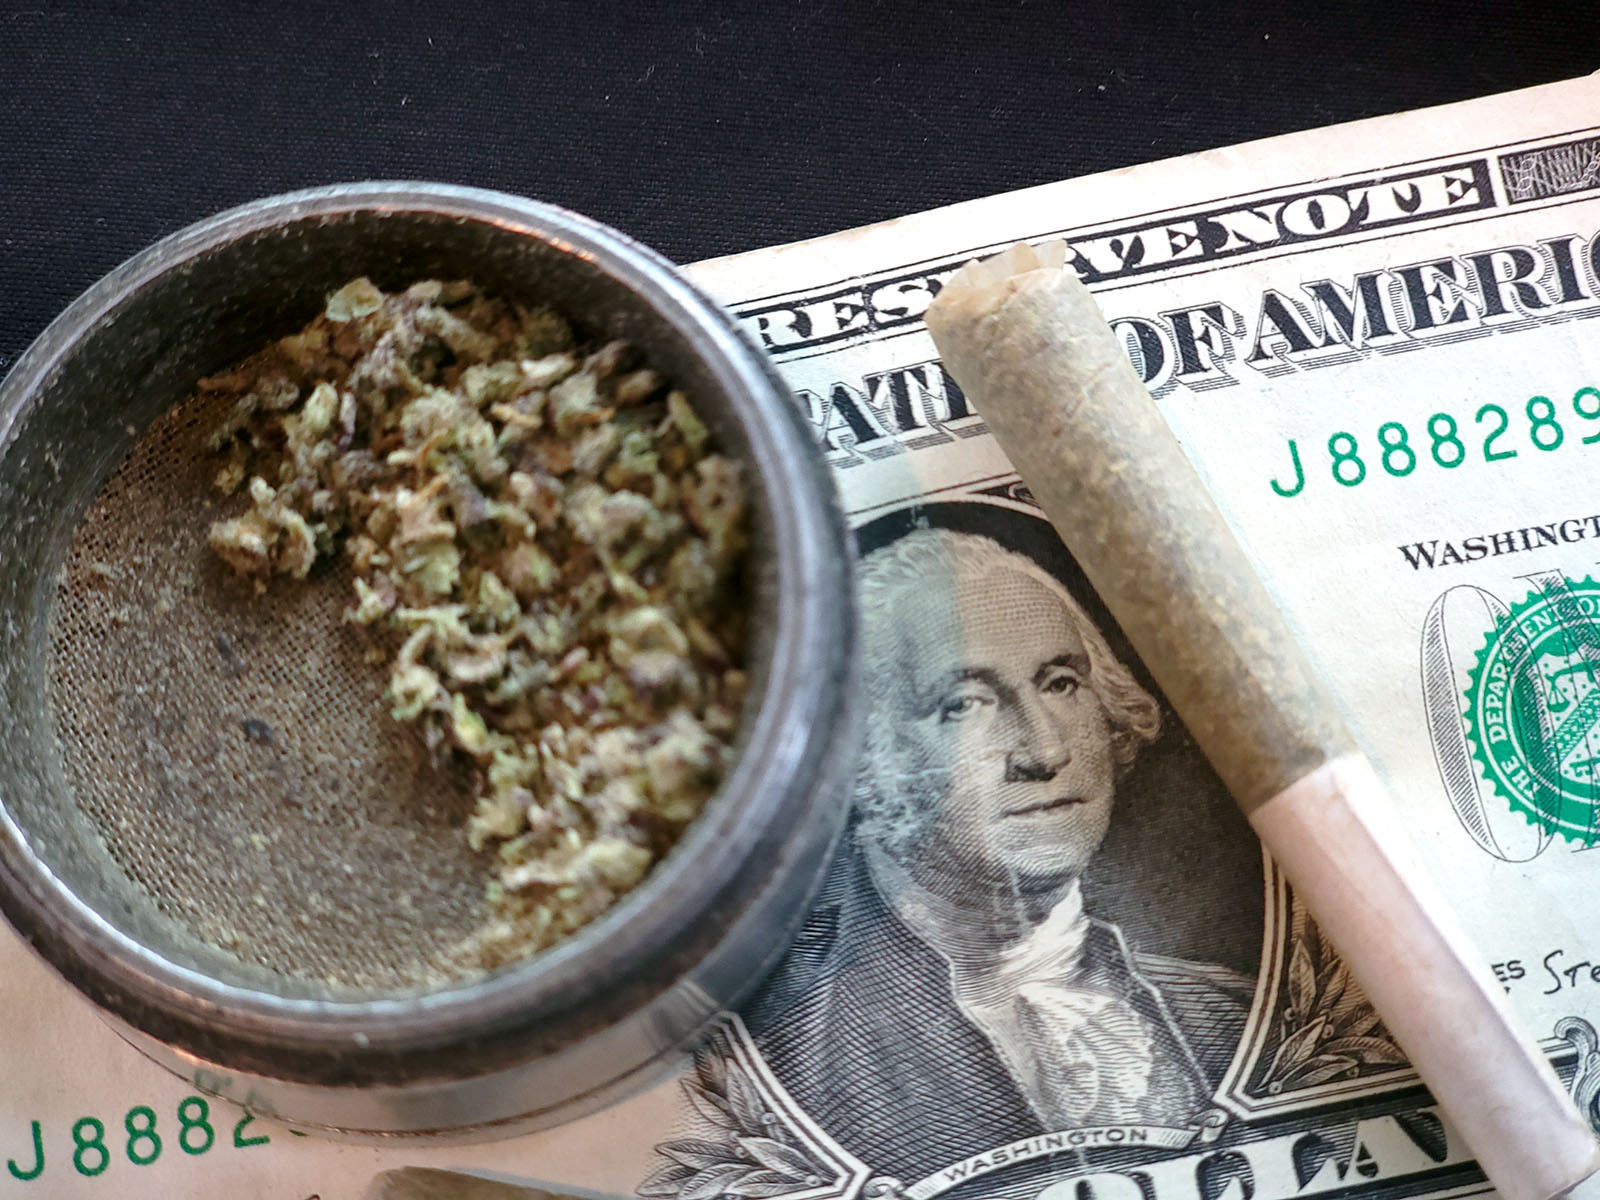 Marijuana buds in container with money